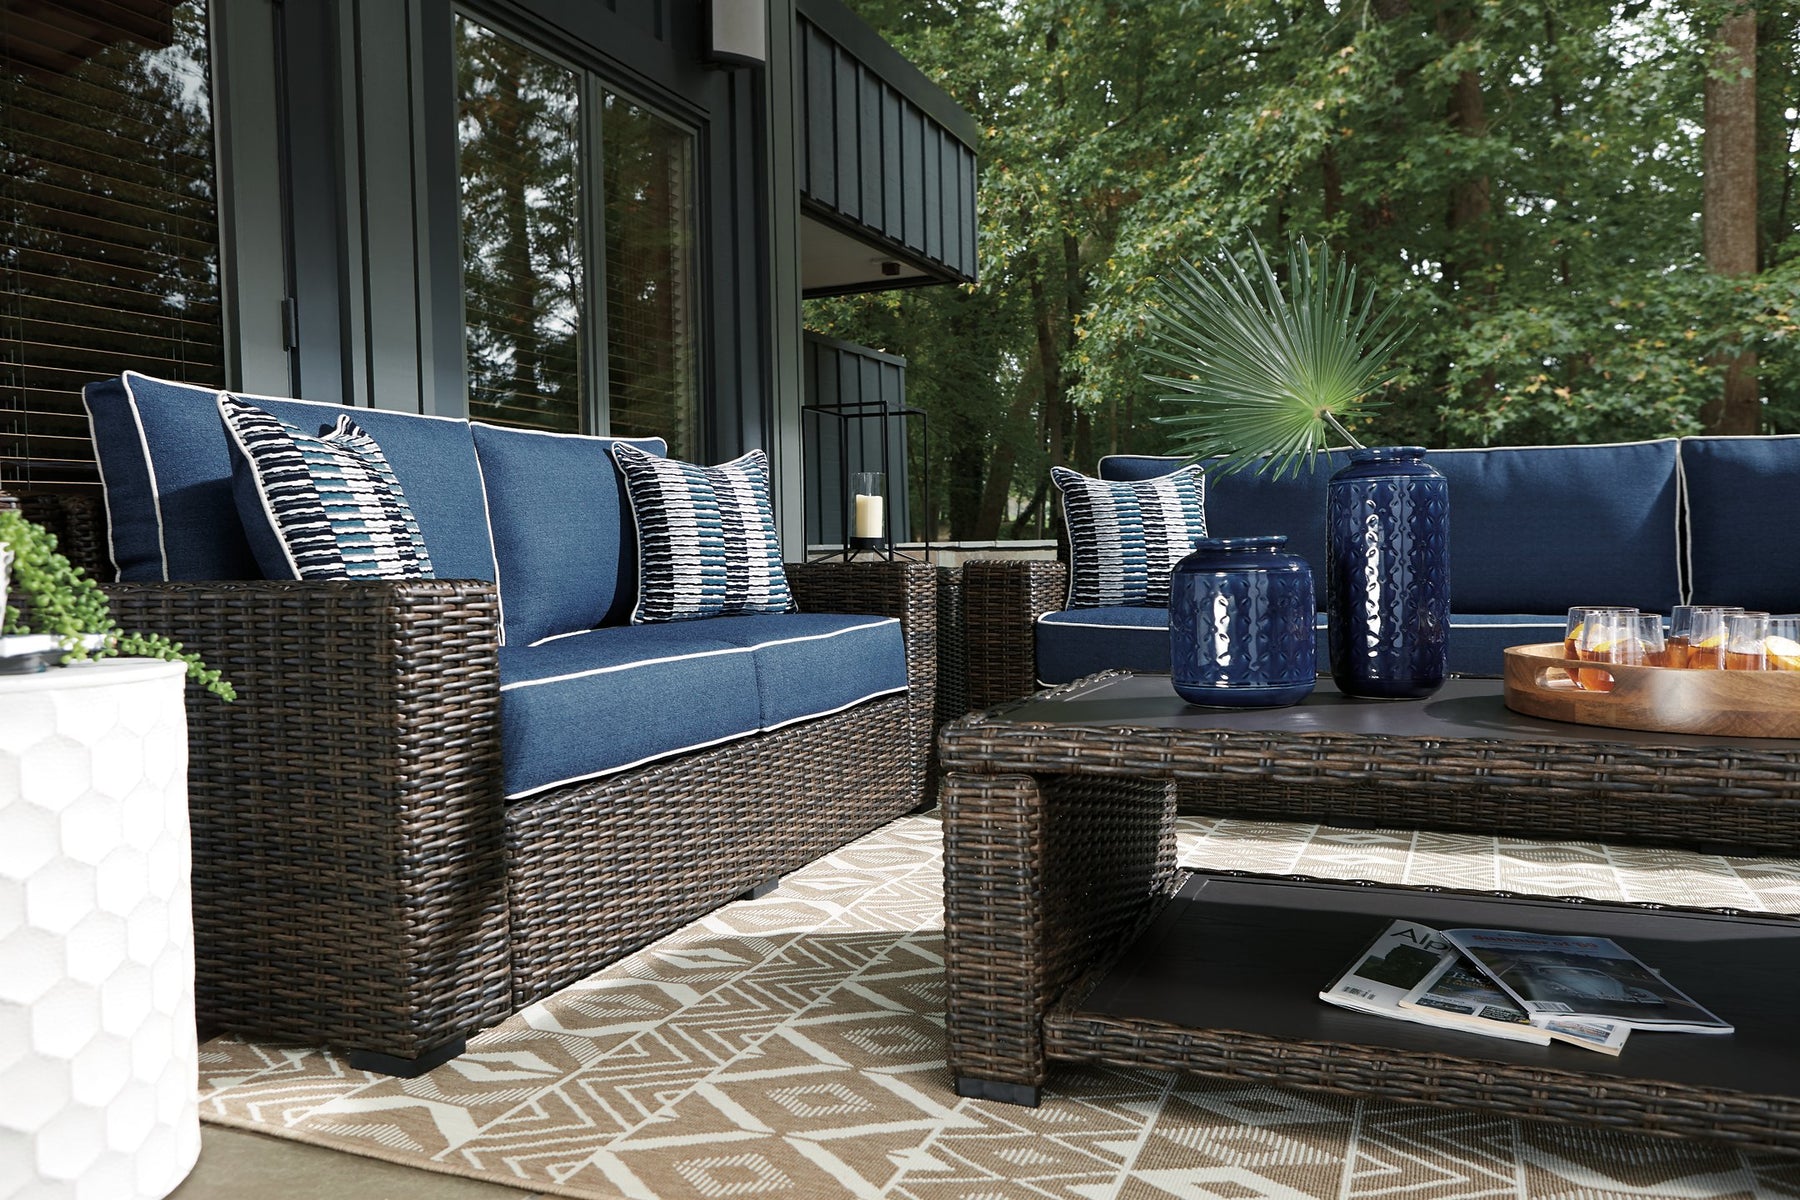 Grasson Lane Outdoor Sofa and Loveseat with Coffee Table - Half Price Furniture